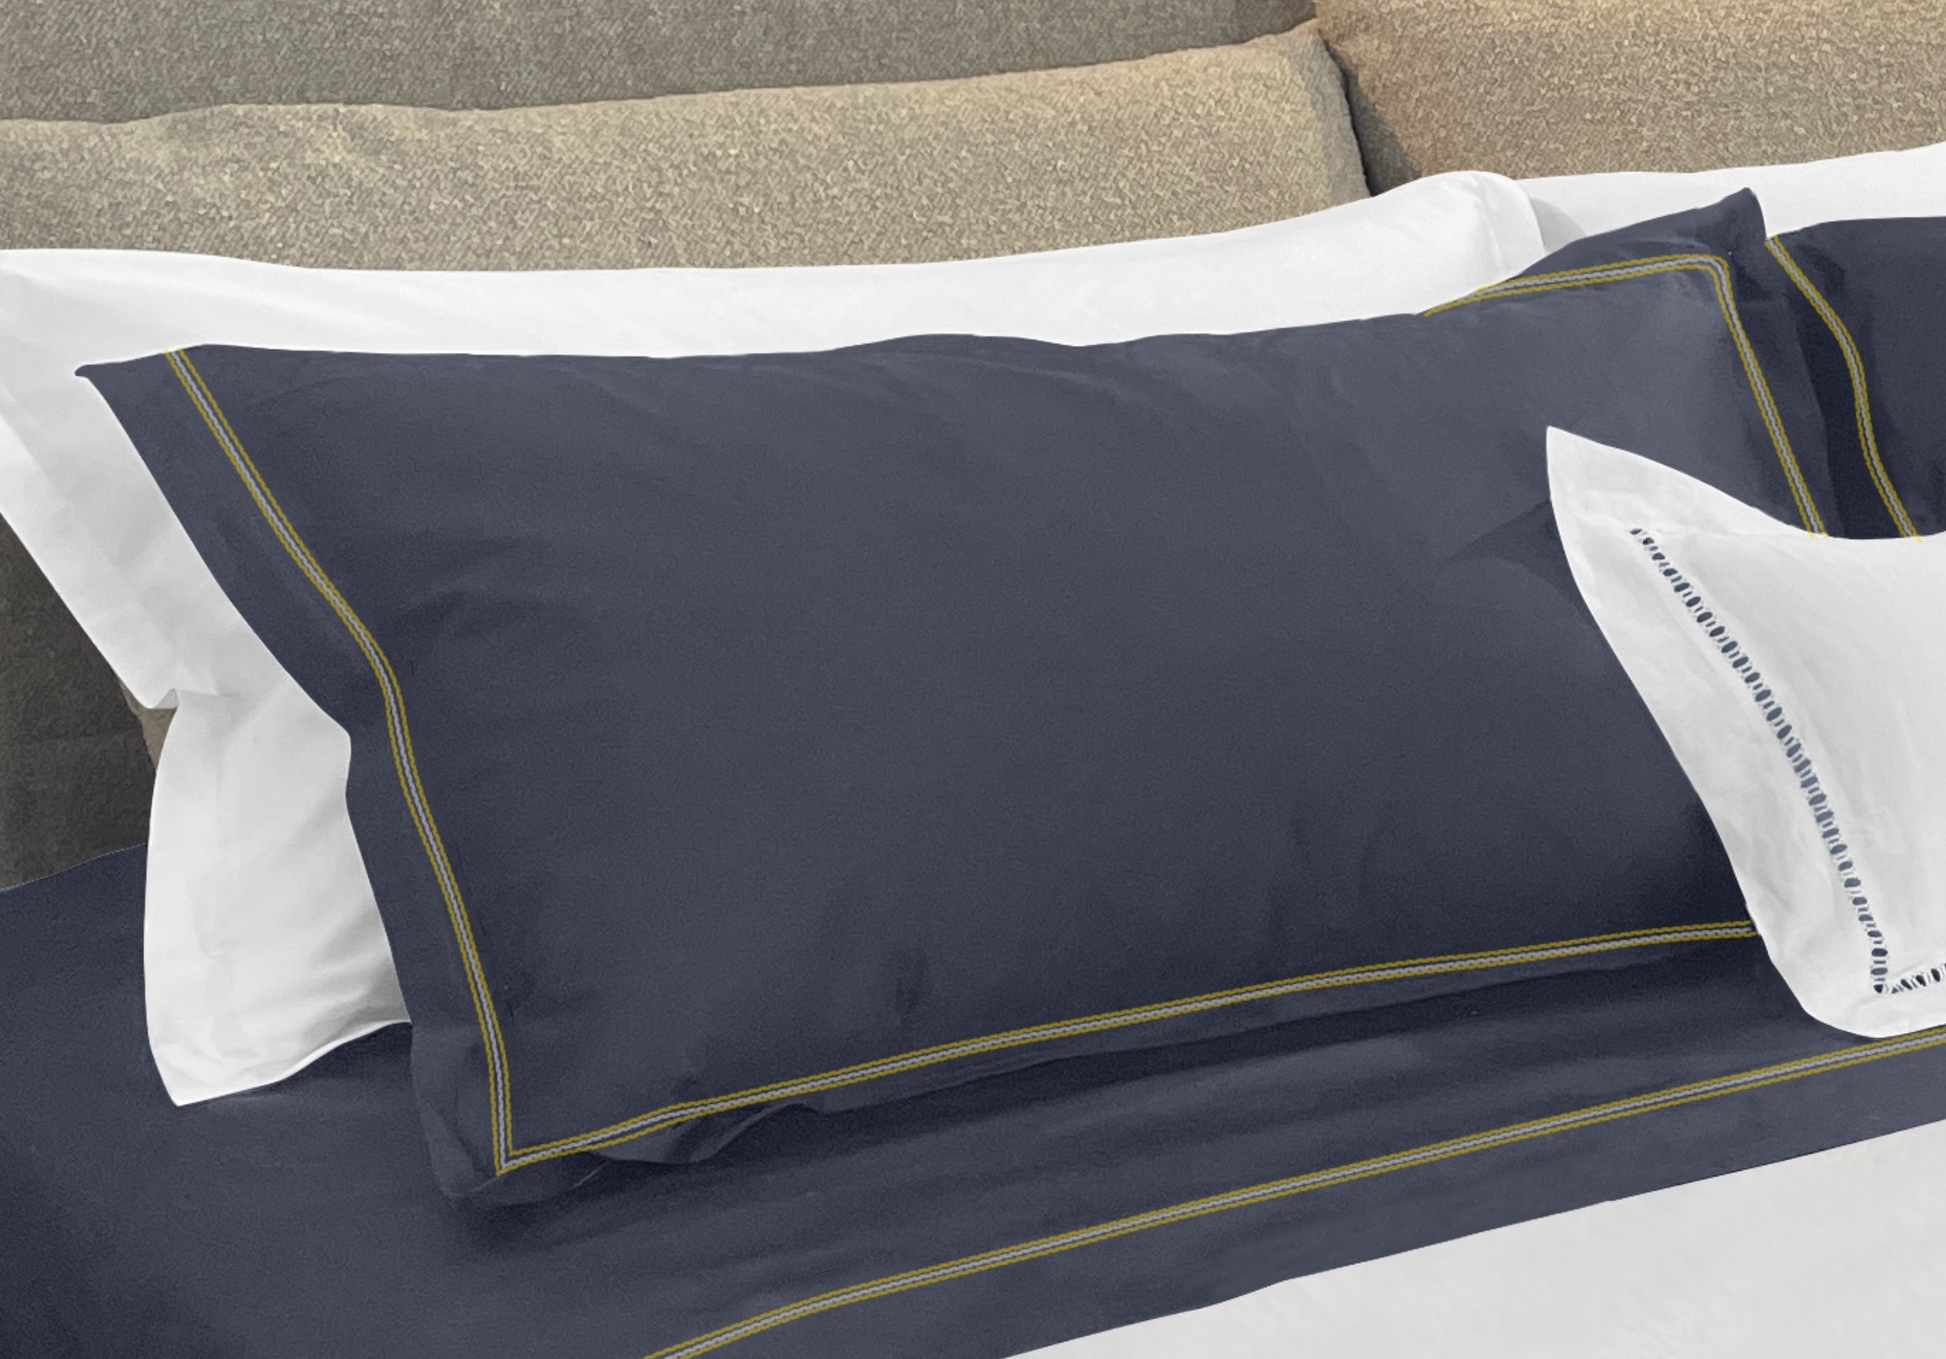 Narragansett Deep Sea Pillow Sham with a triple contrasting stitch in Yellow, White and Yellow. It is shown with our Daily Basics 300tc Egyptian Cotton Sateen Sleeping Sham in White.